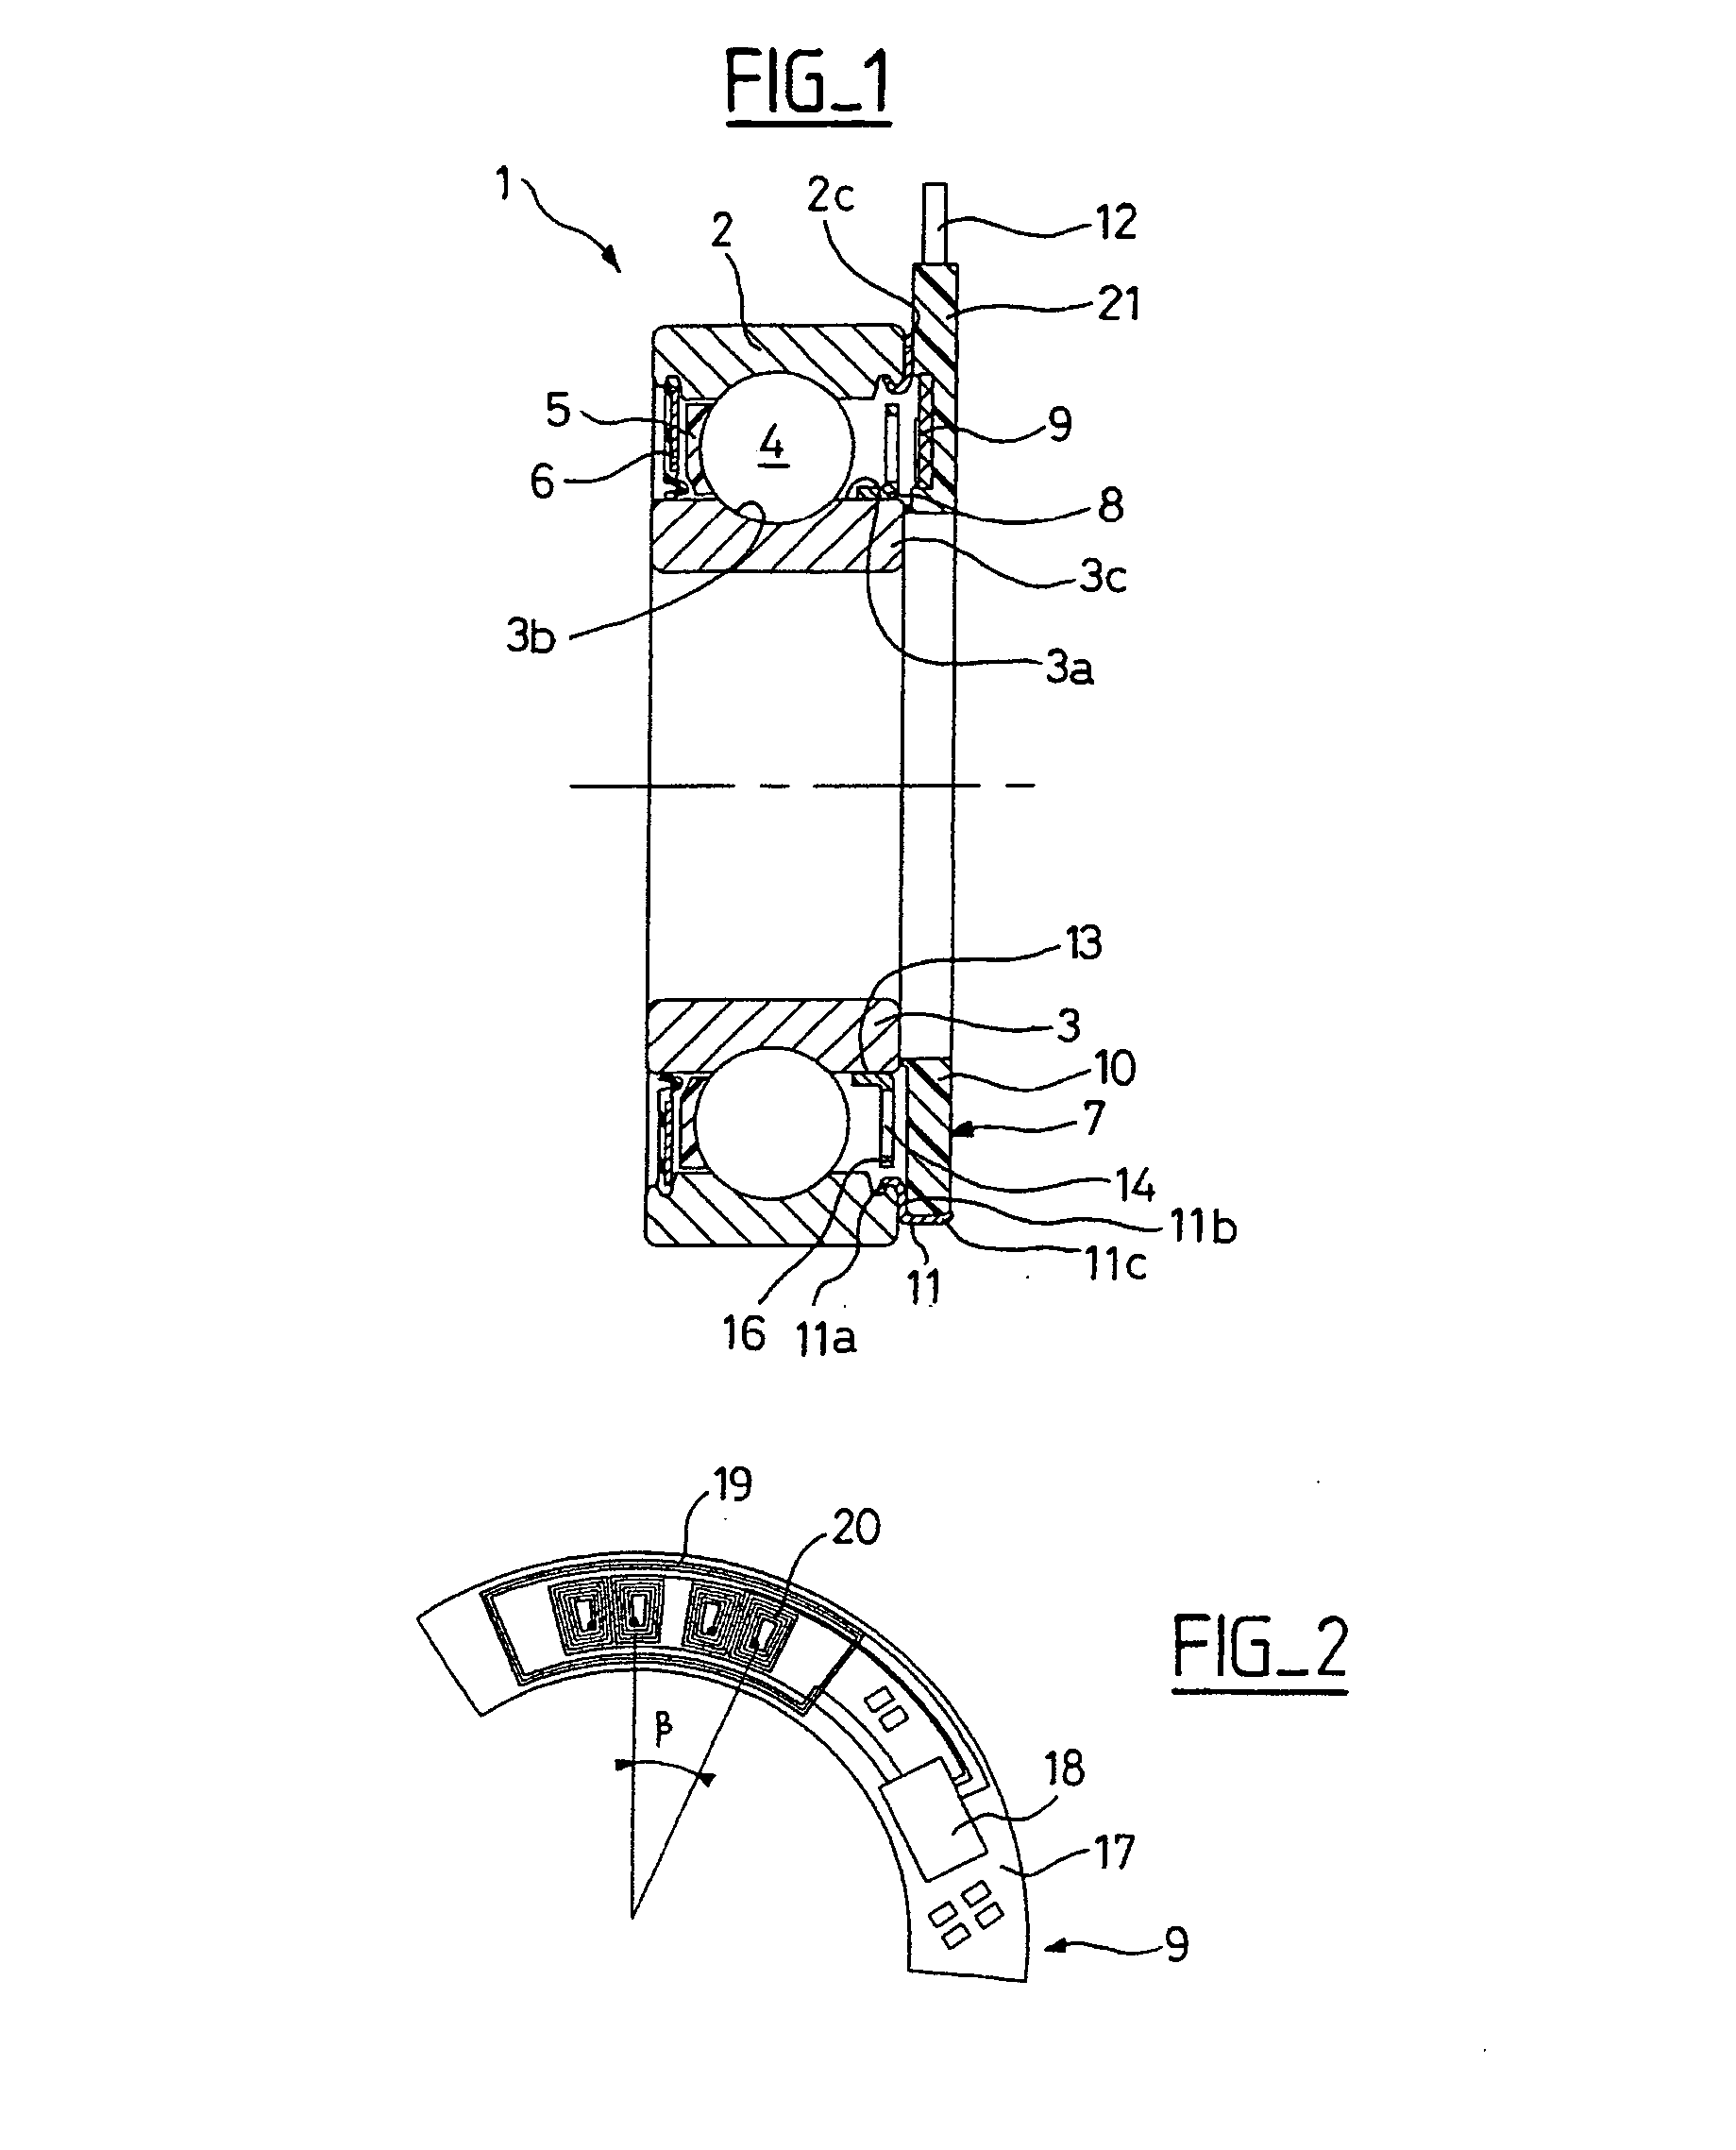 Instrumented antifriction bearing and electrical motor equipped therewith